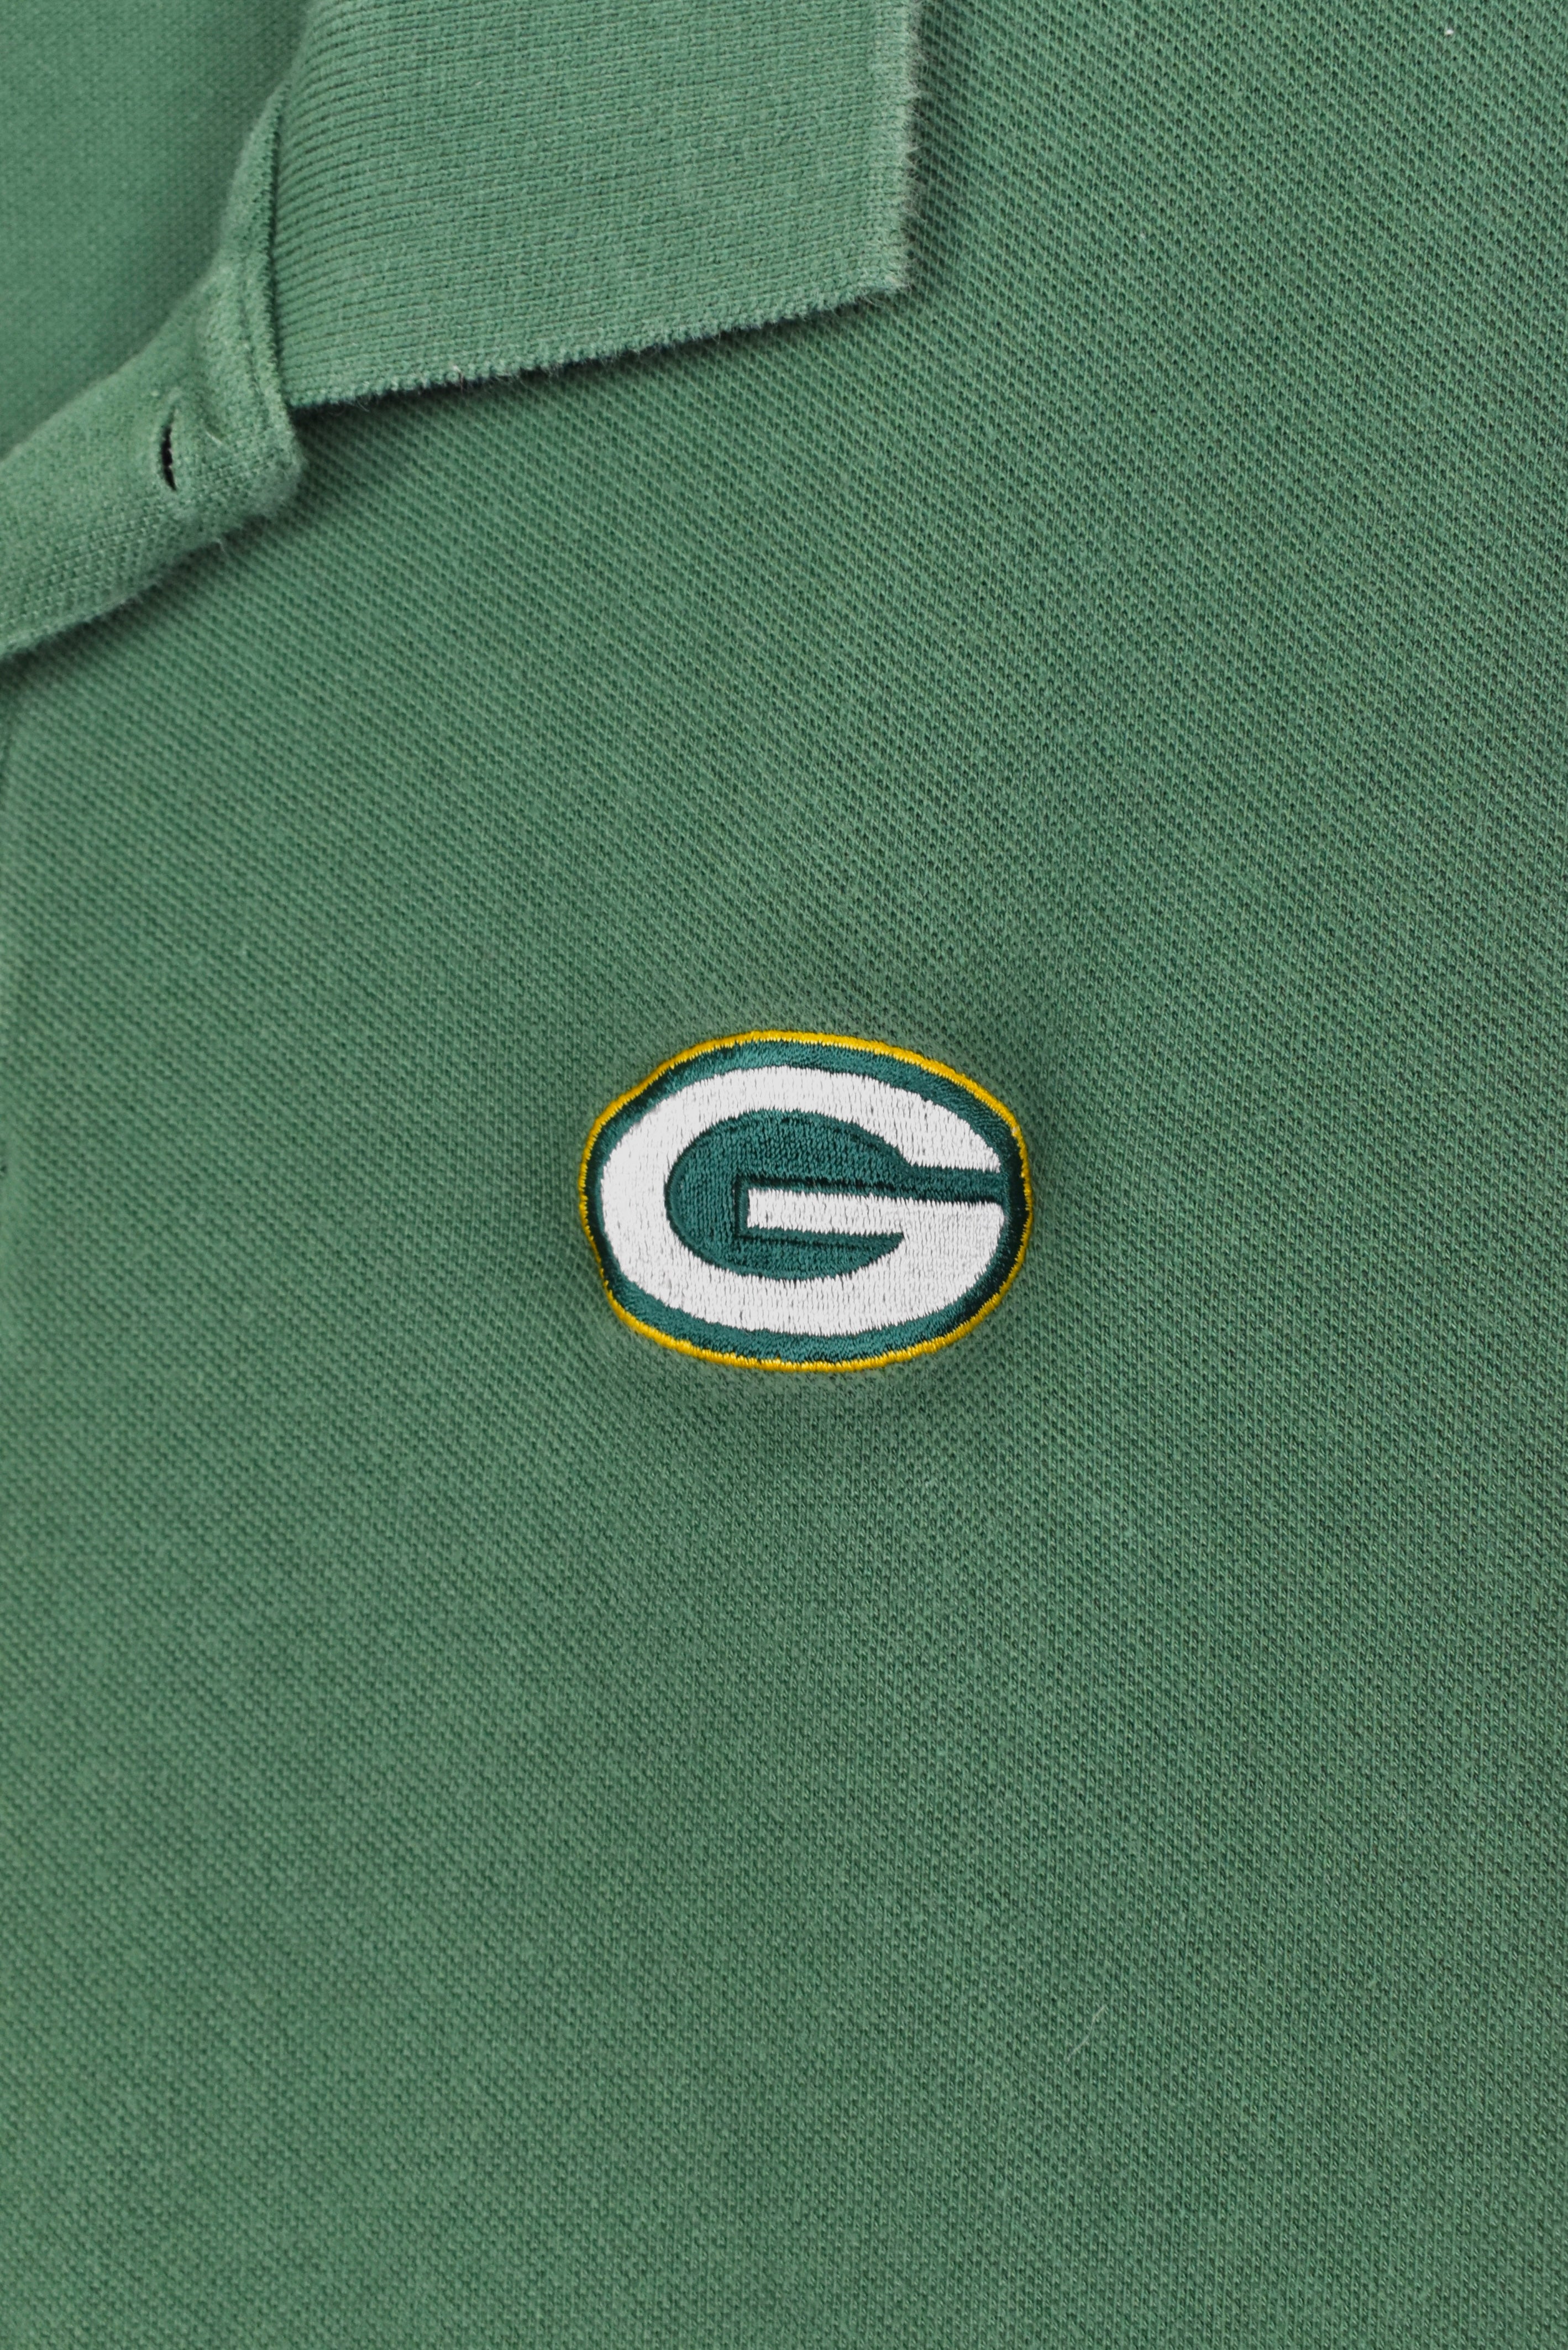 Vintage Green Bay Packers shirt, NFL green embroidered polo - AU XL PRO SPORT